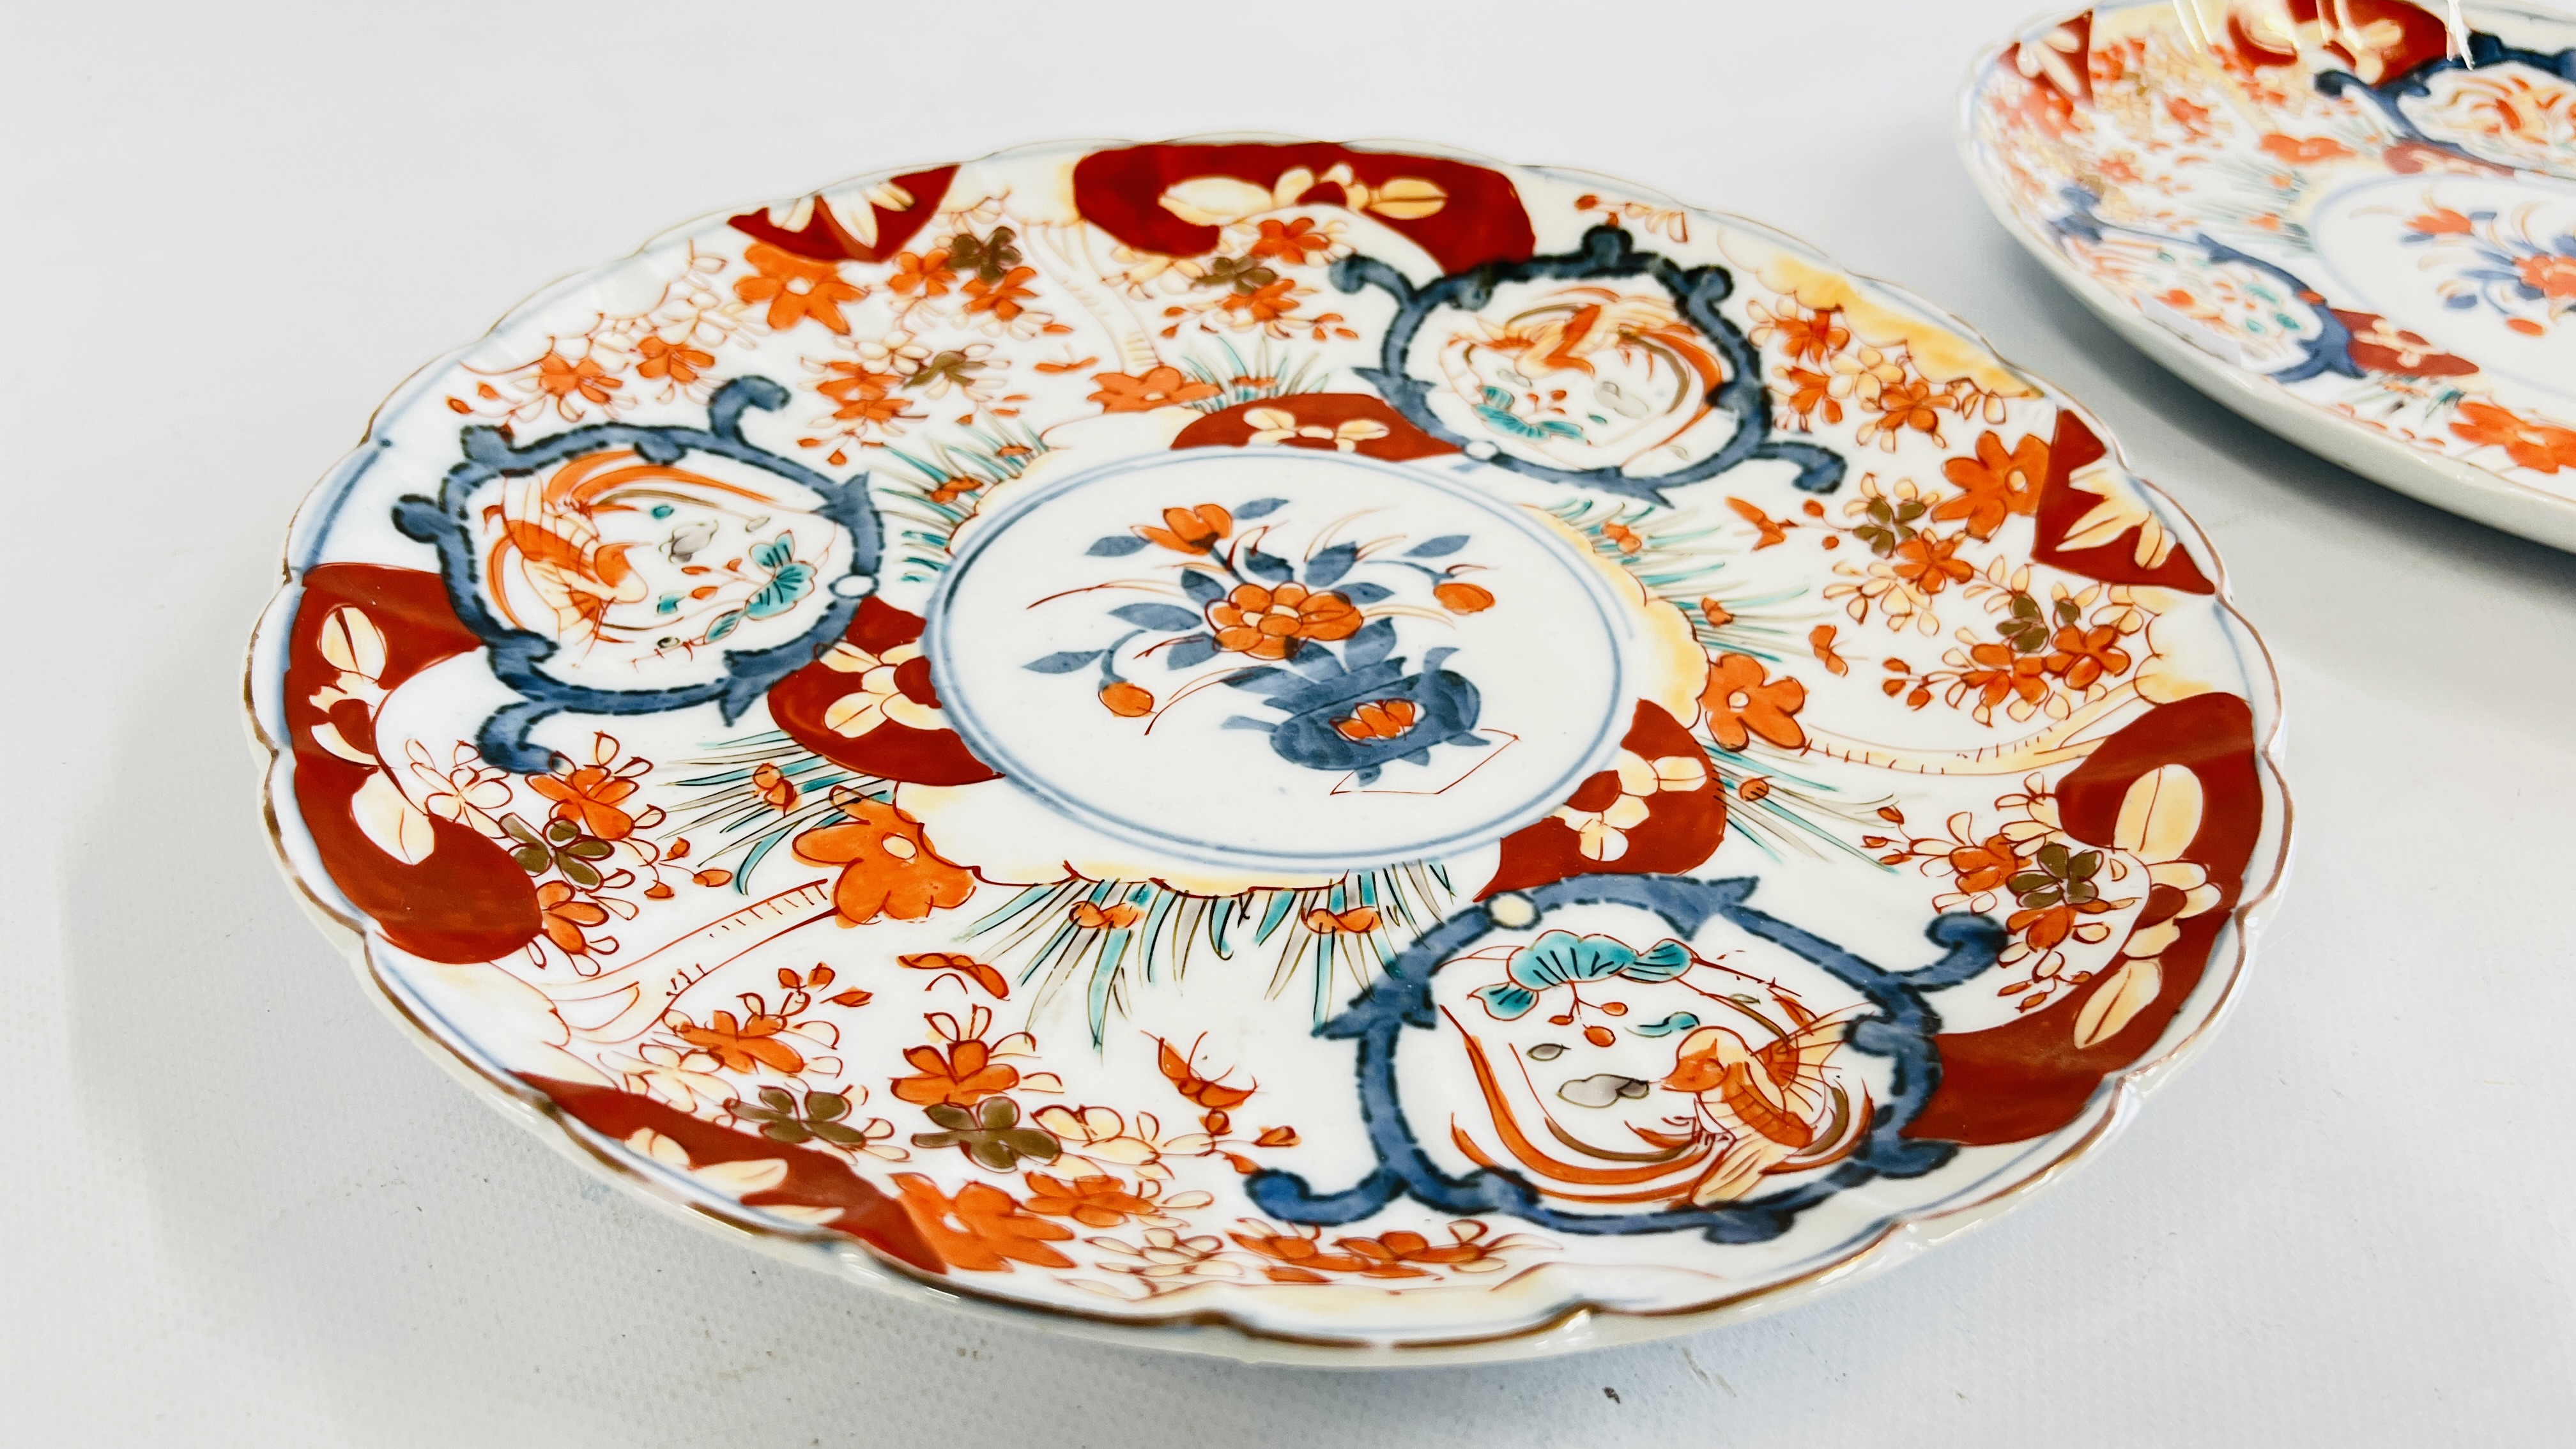 A PAIR OF VINTAGE IMARI PATTERN PLATES - DIAM 28.5CM (RIM CHIP & HAIRLINE CRACK TO ONE EXAMPLE). - Image 2 of 6